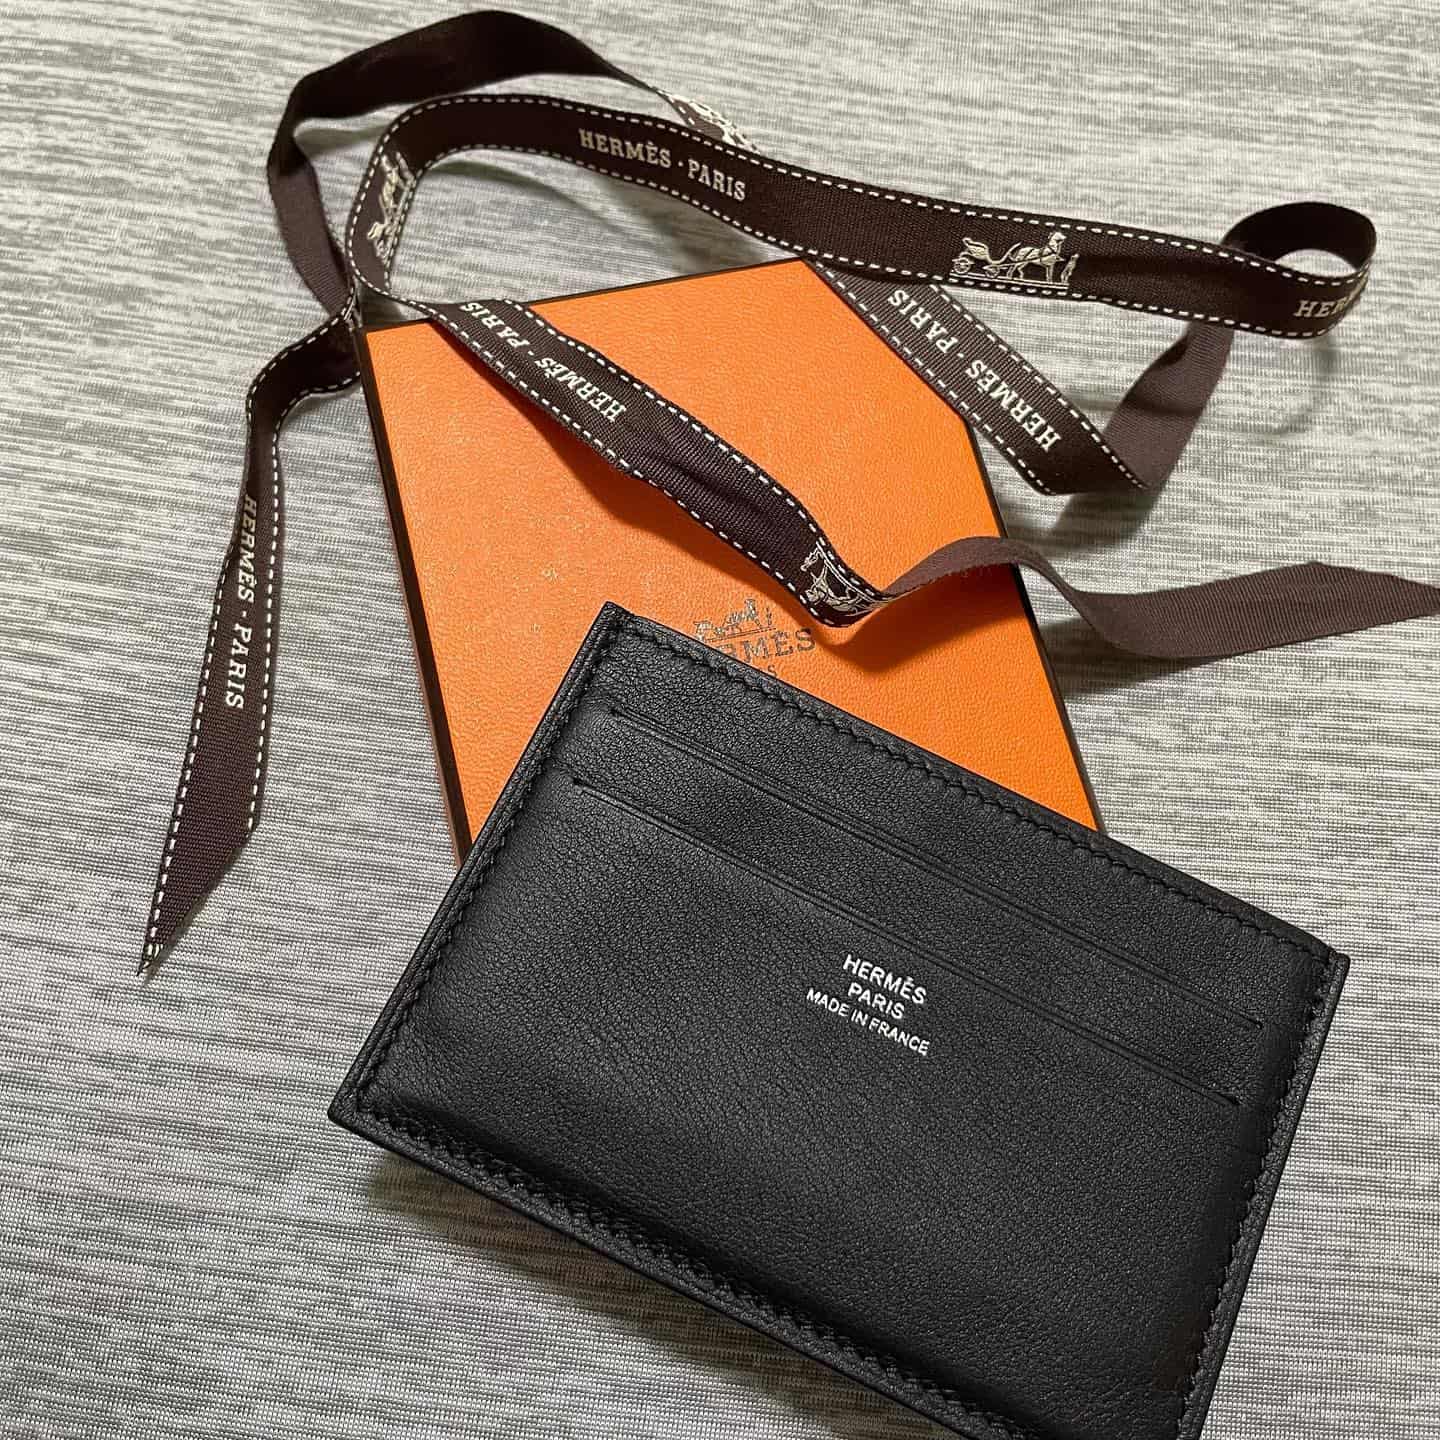 Is the Hermes Card holder worth it